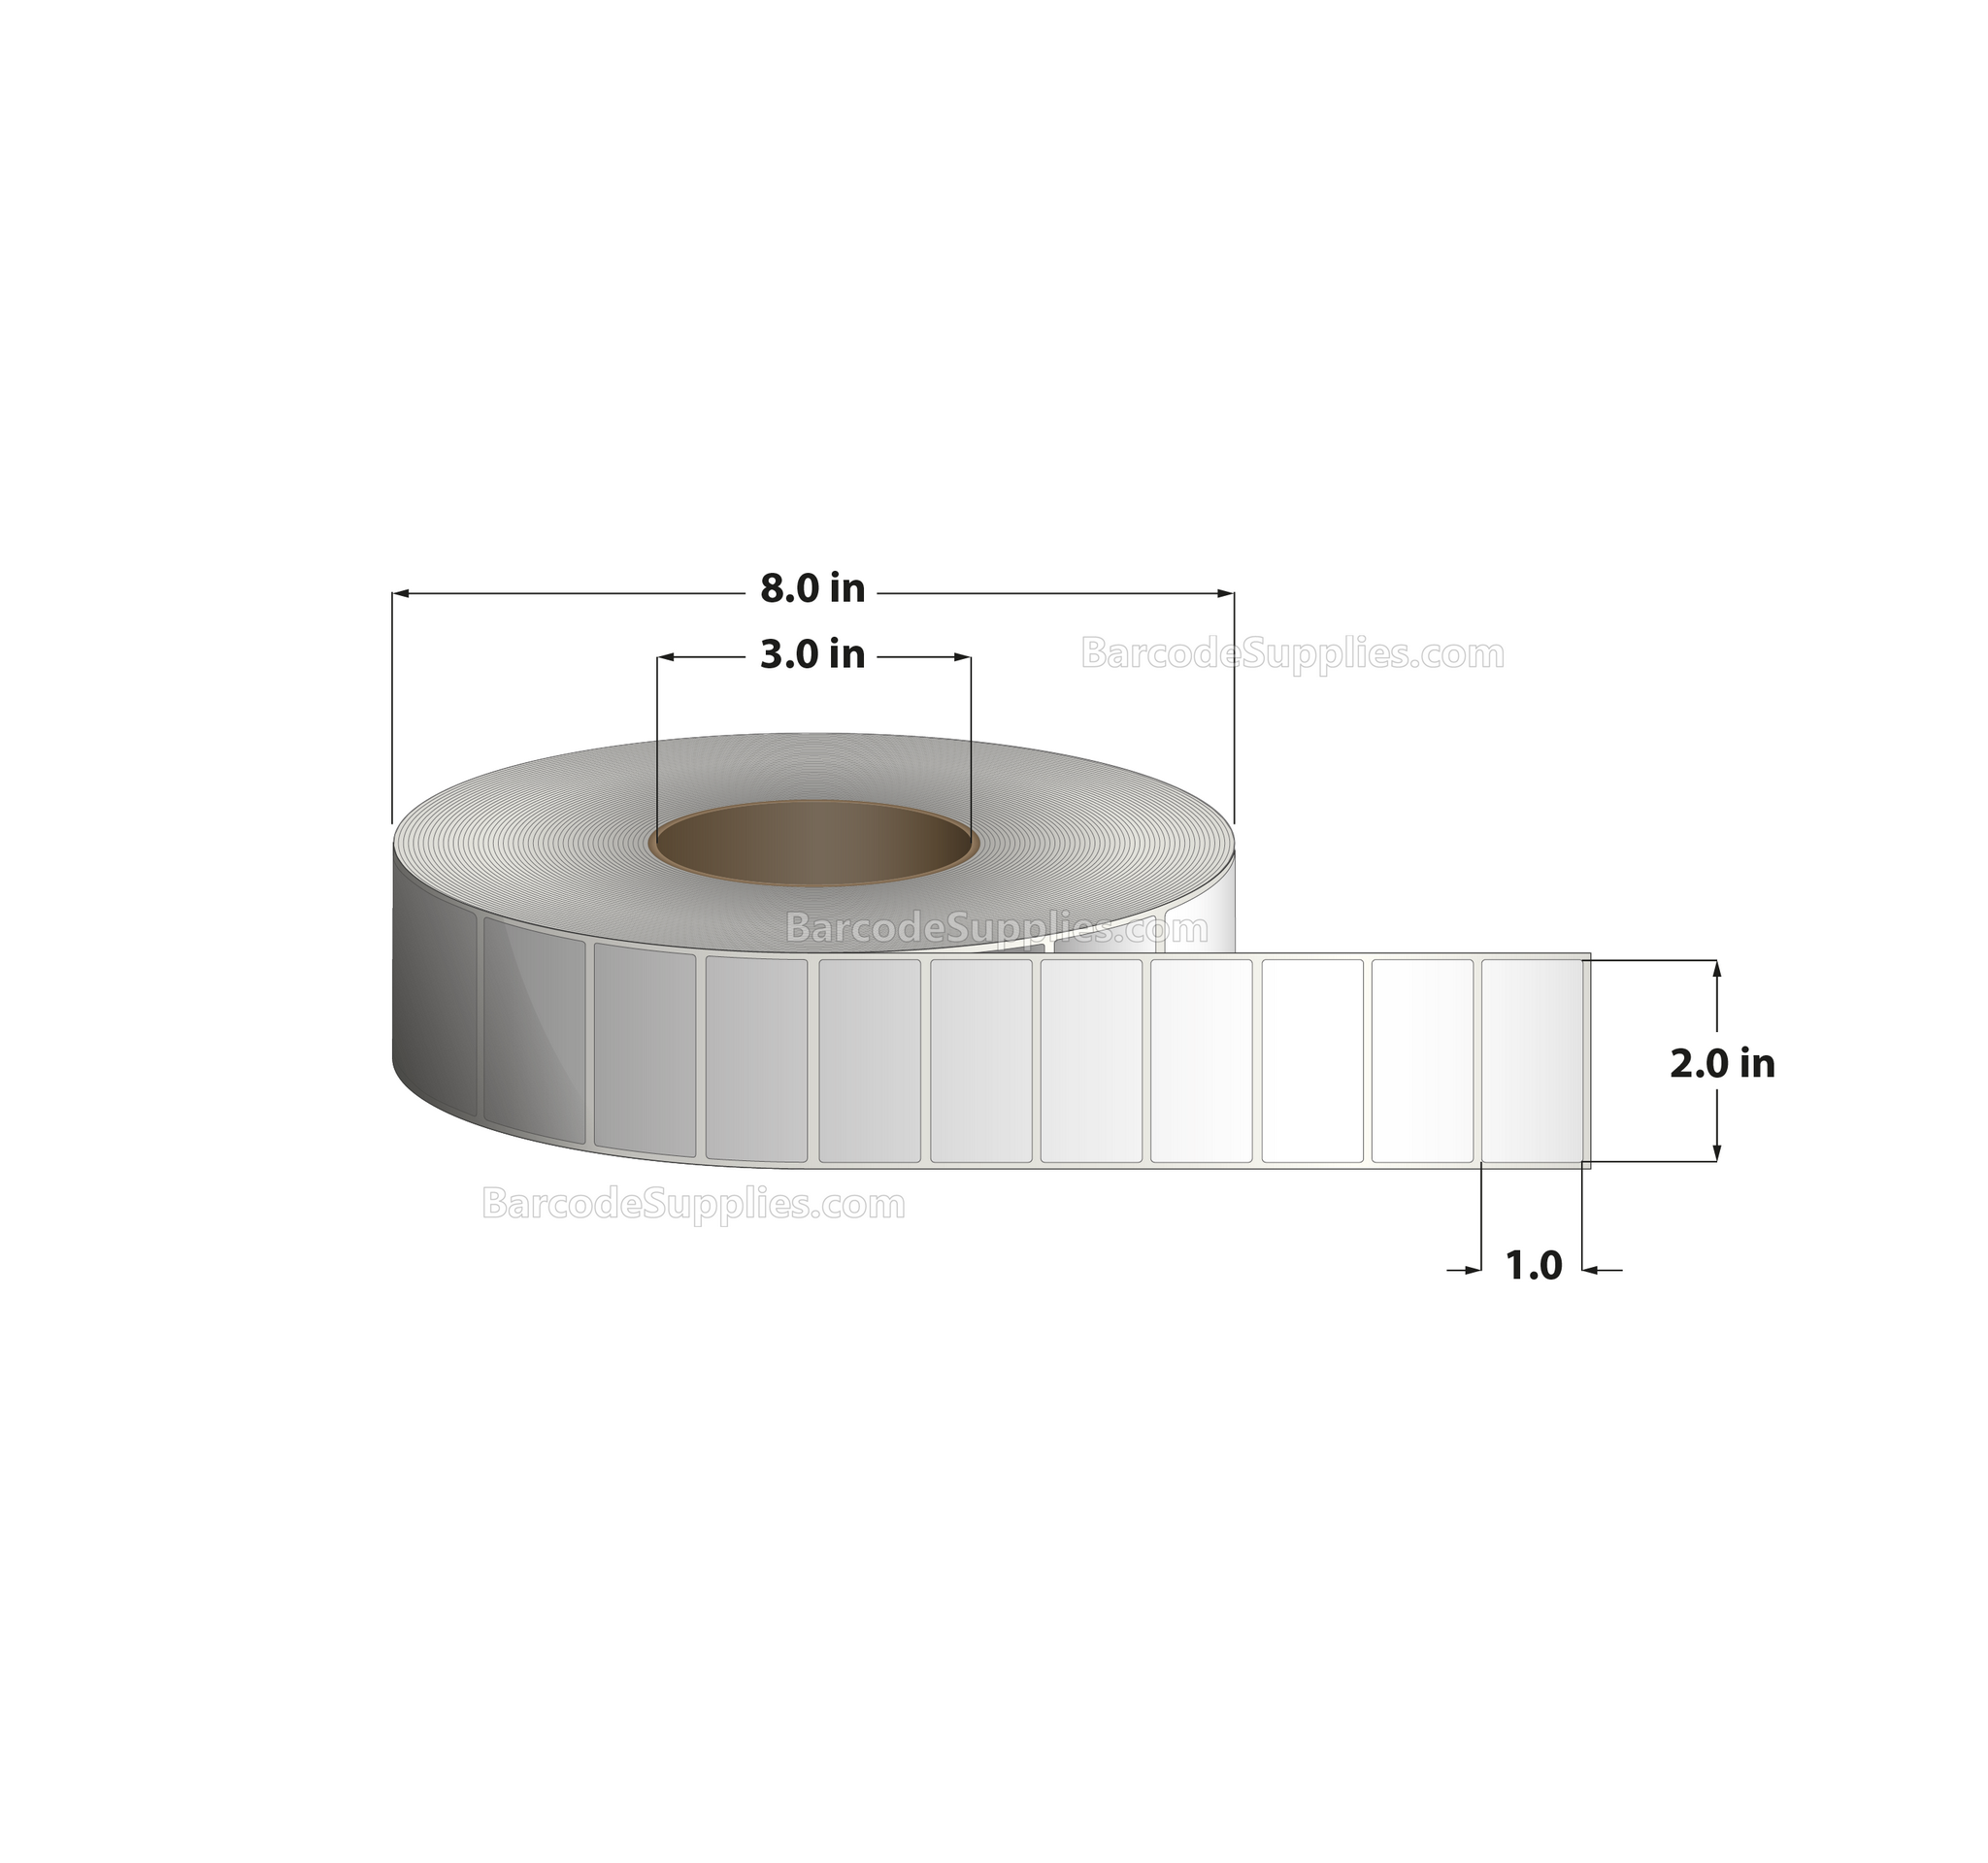 2 x 1 Thermal Transfer White Labels With Permanent Acrylic Adhesive - Not Perforated - 5500 Labels Per Roll - Carton Of 8 Rolls - 44000 Labels Total - MPN: TH21-1